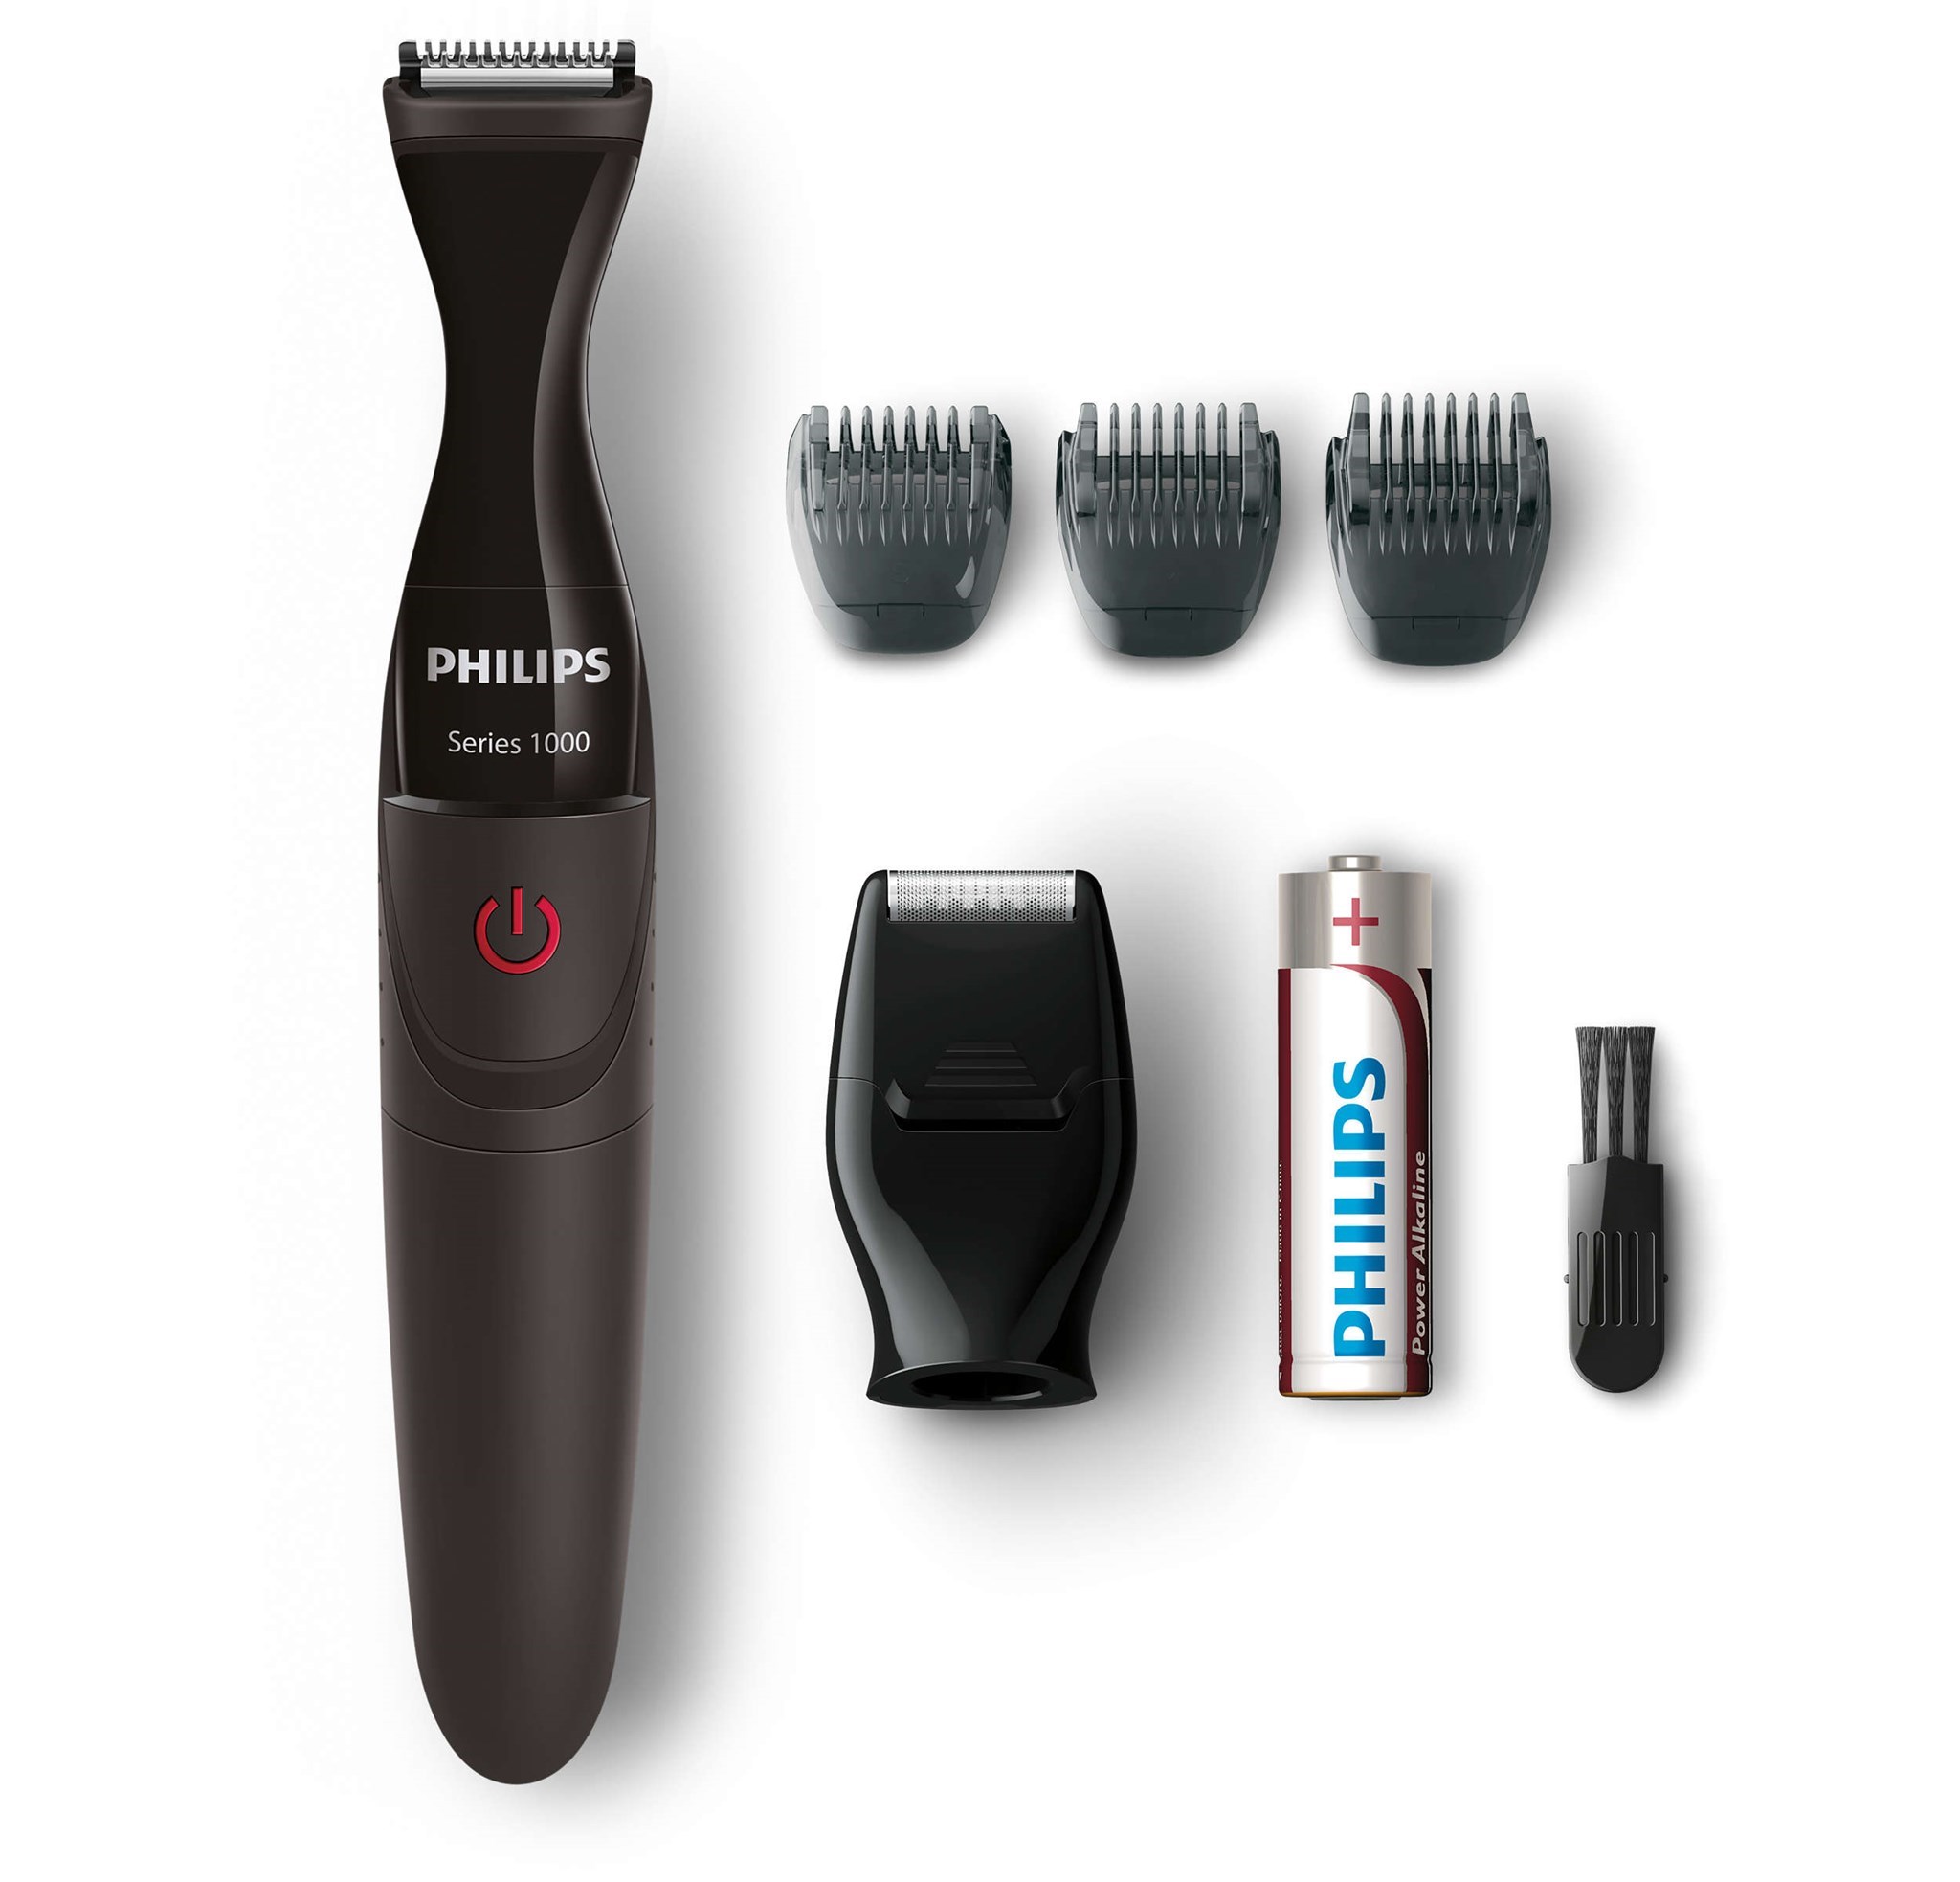 philips trimmer and shaver price